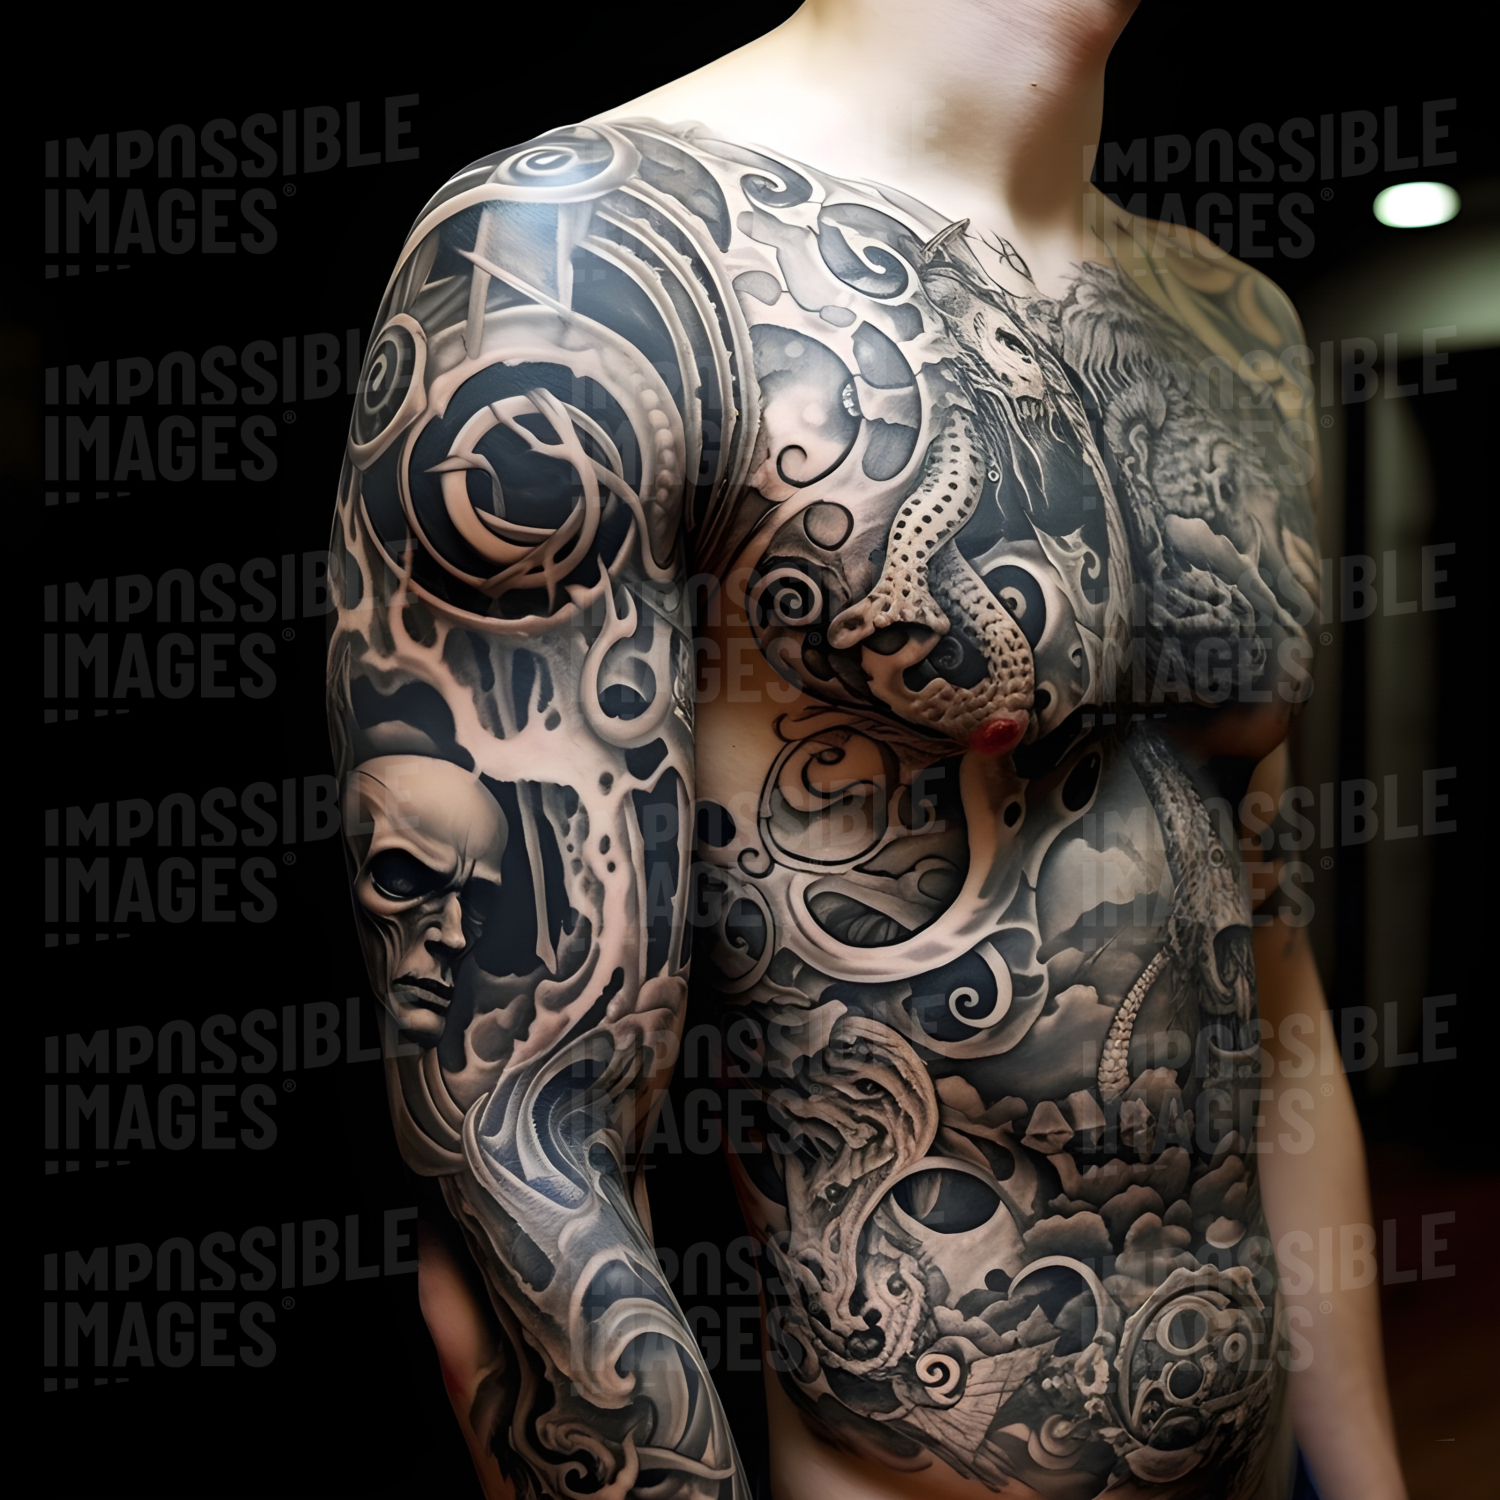 Super intricate tattoo covering a man’s arm and torso - 